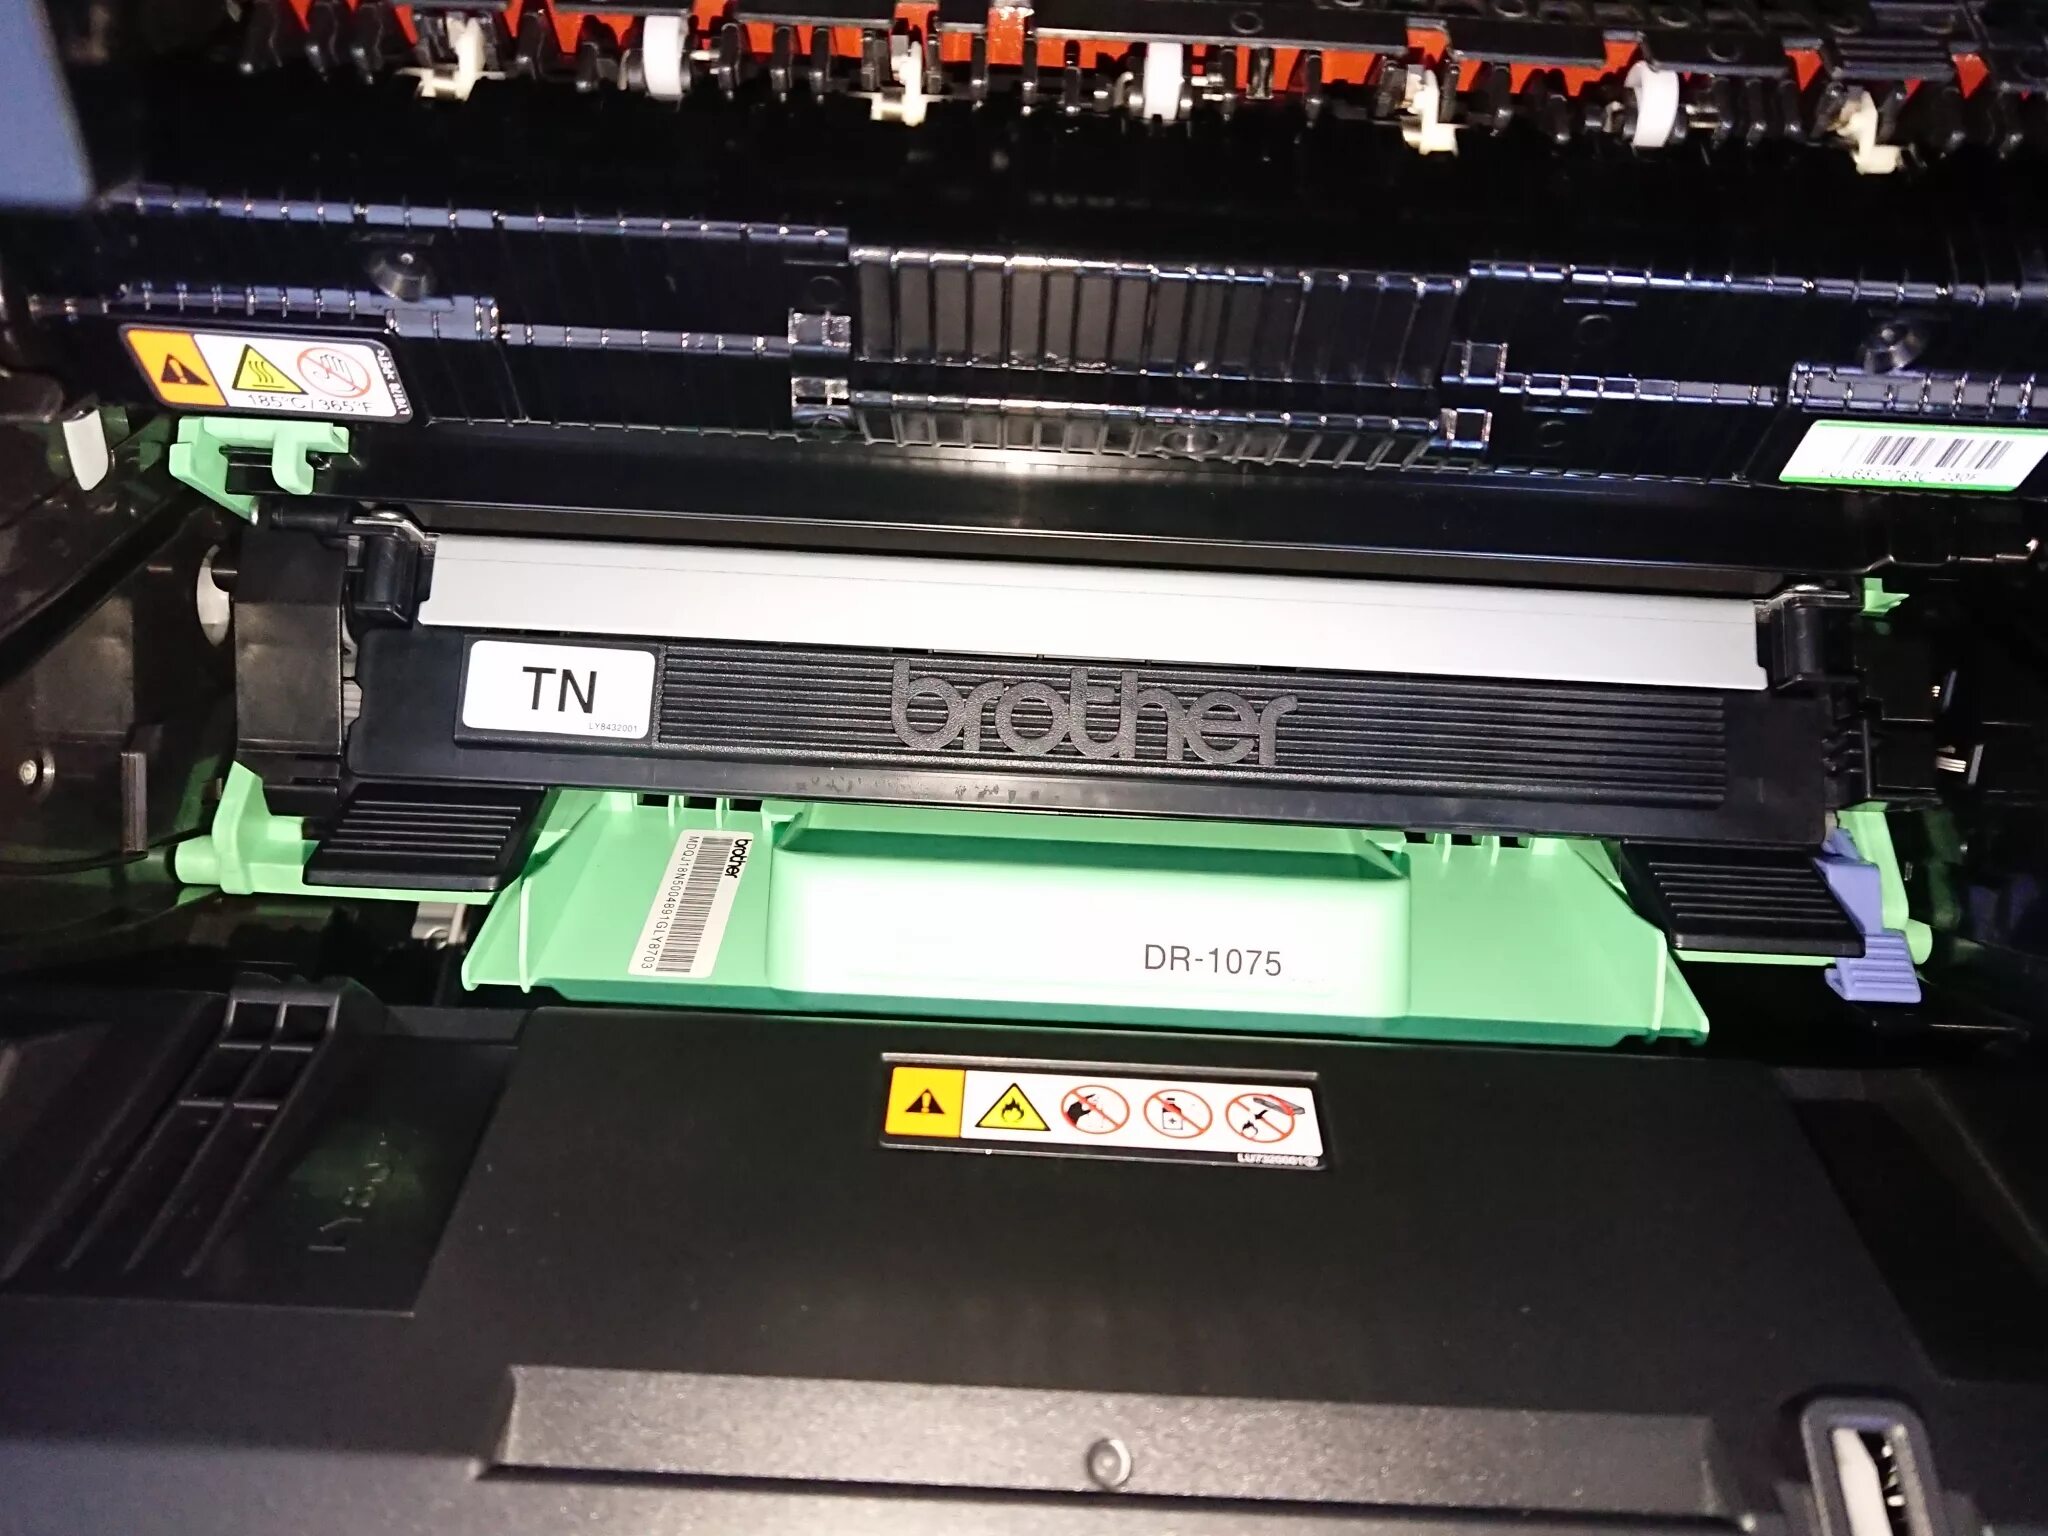 Brother 1510r картридж. Brother DCP-1510r. Brother DCP 1510. Принтер бротхер 1510. Brother DCP-1510r картридж.